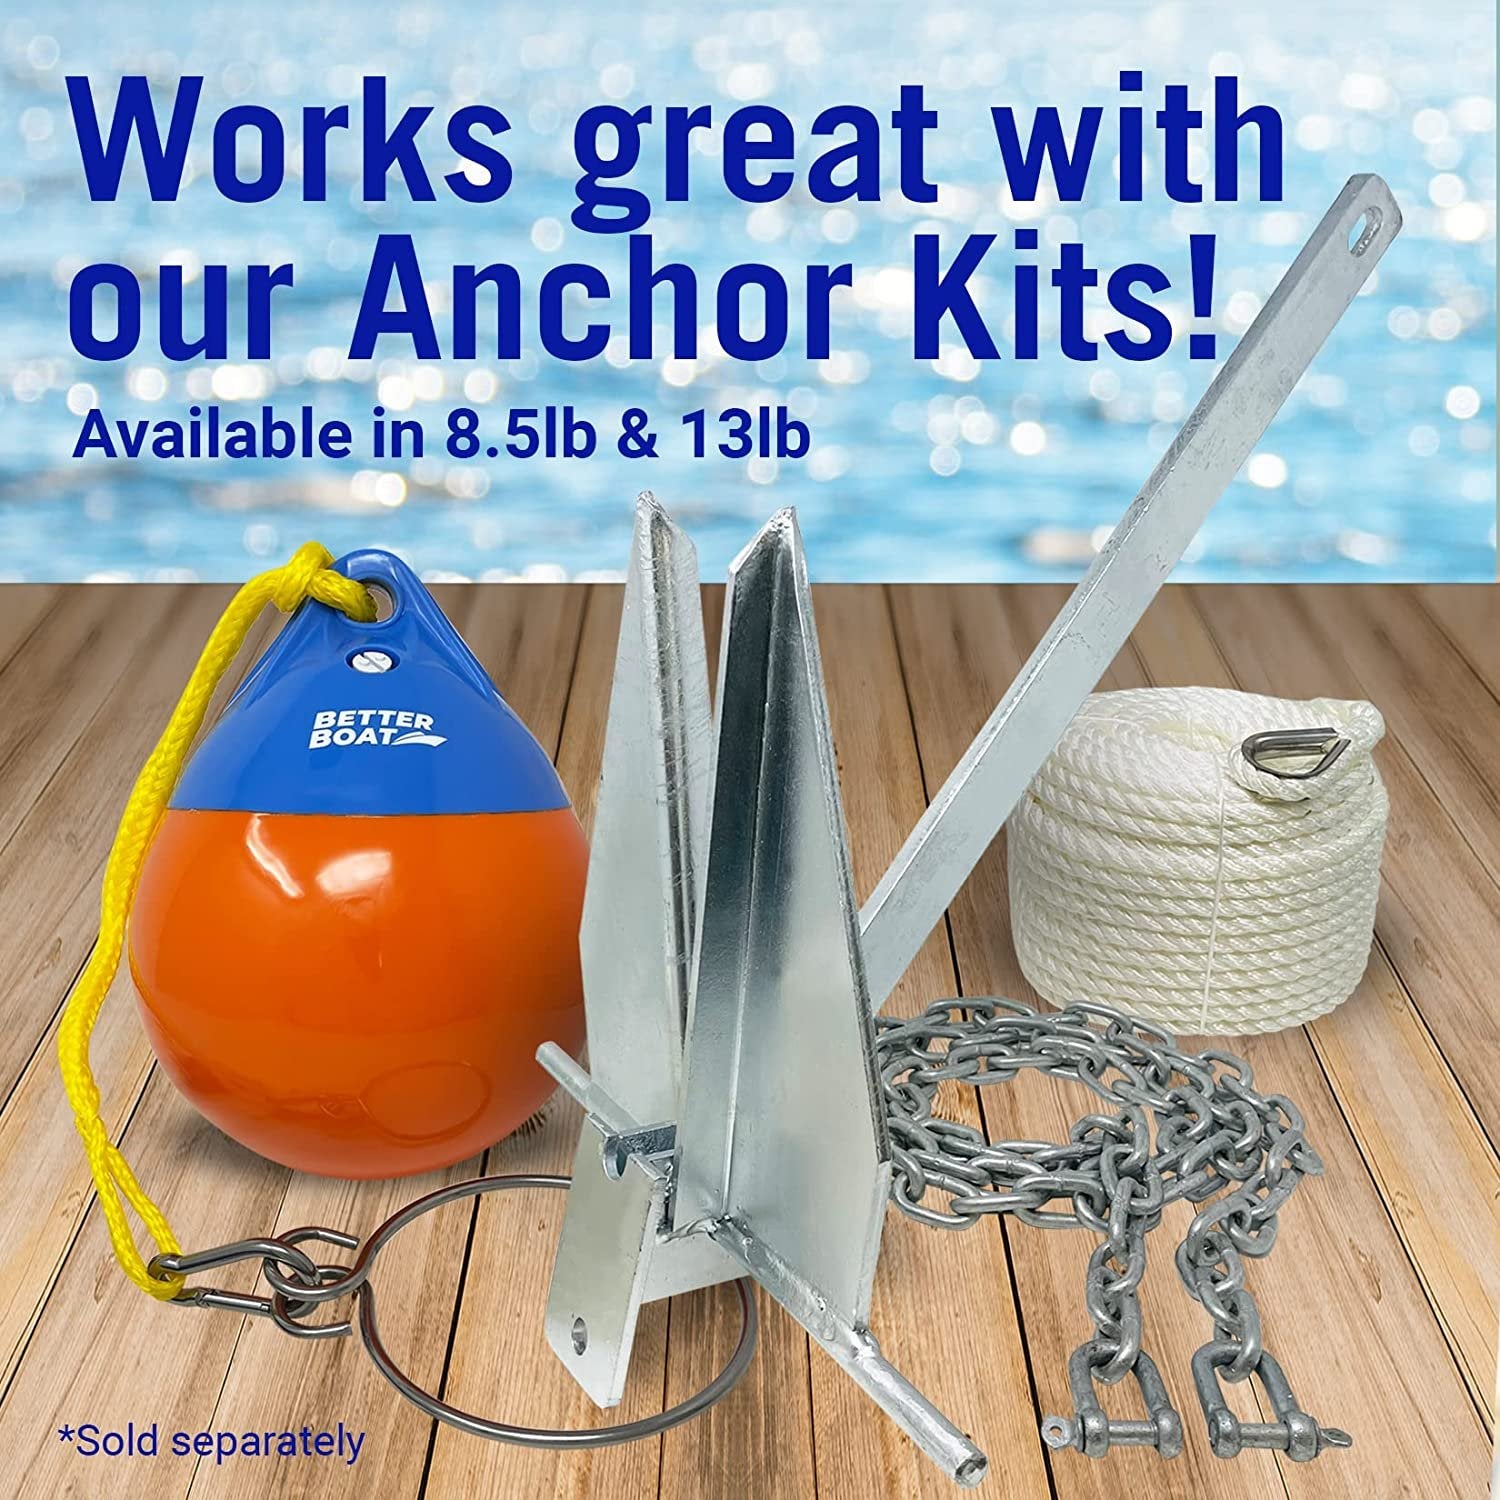 Anchor Buoy & Retrieval Ring Vinyl Boat Bouy Balls Round Boat Mooring Buoys, Bumper or Marker and Anchor Float Ball Floating Pick Up for Rope Line Crab Pot Puller or Inflatable Dock Sea & Lake